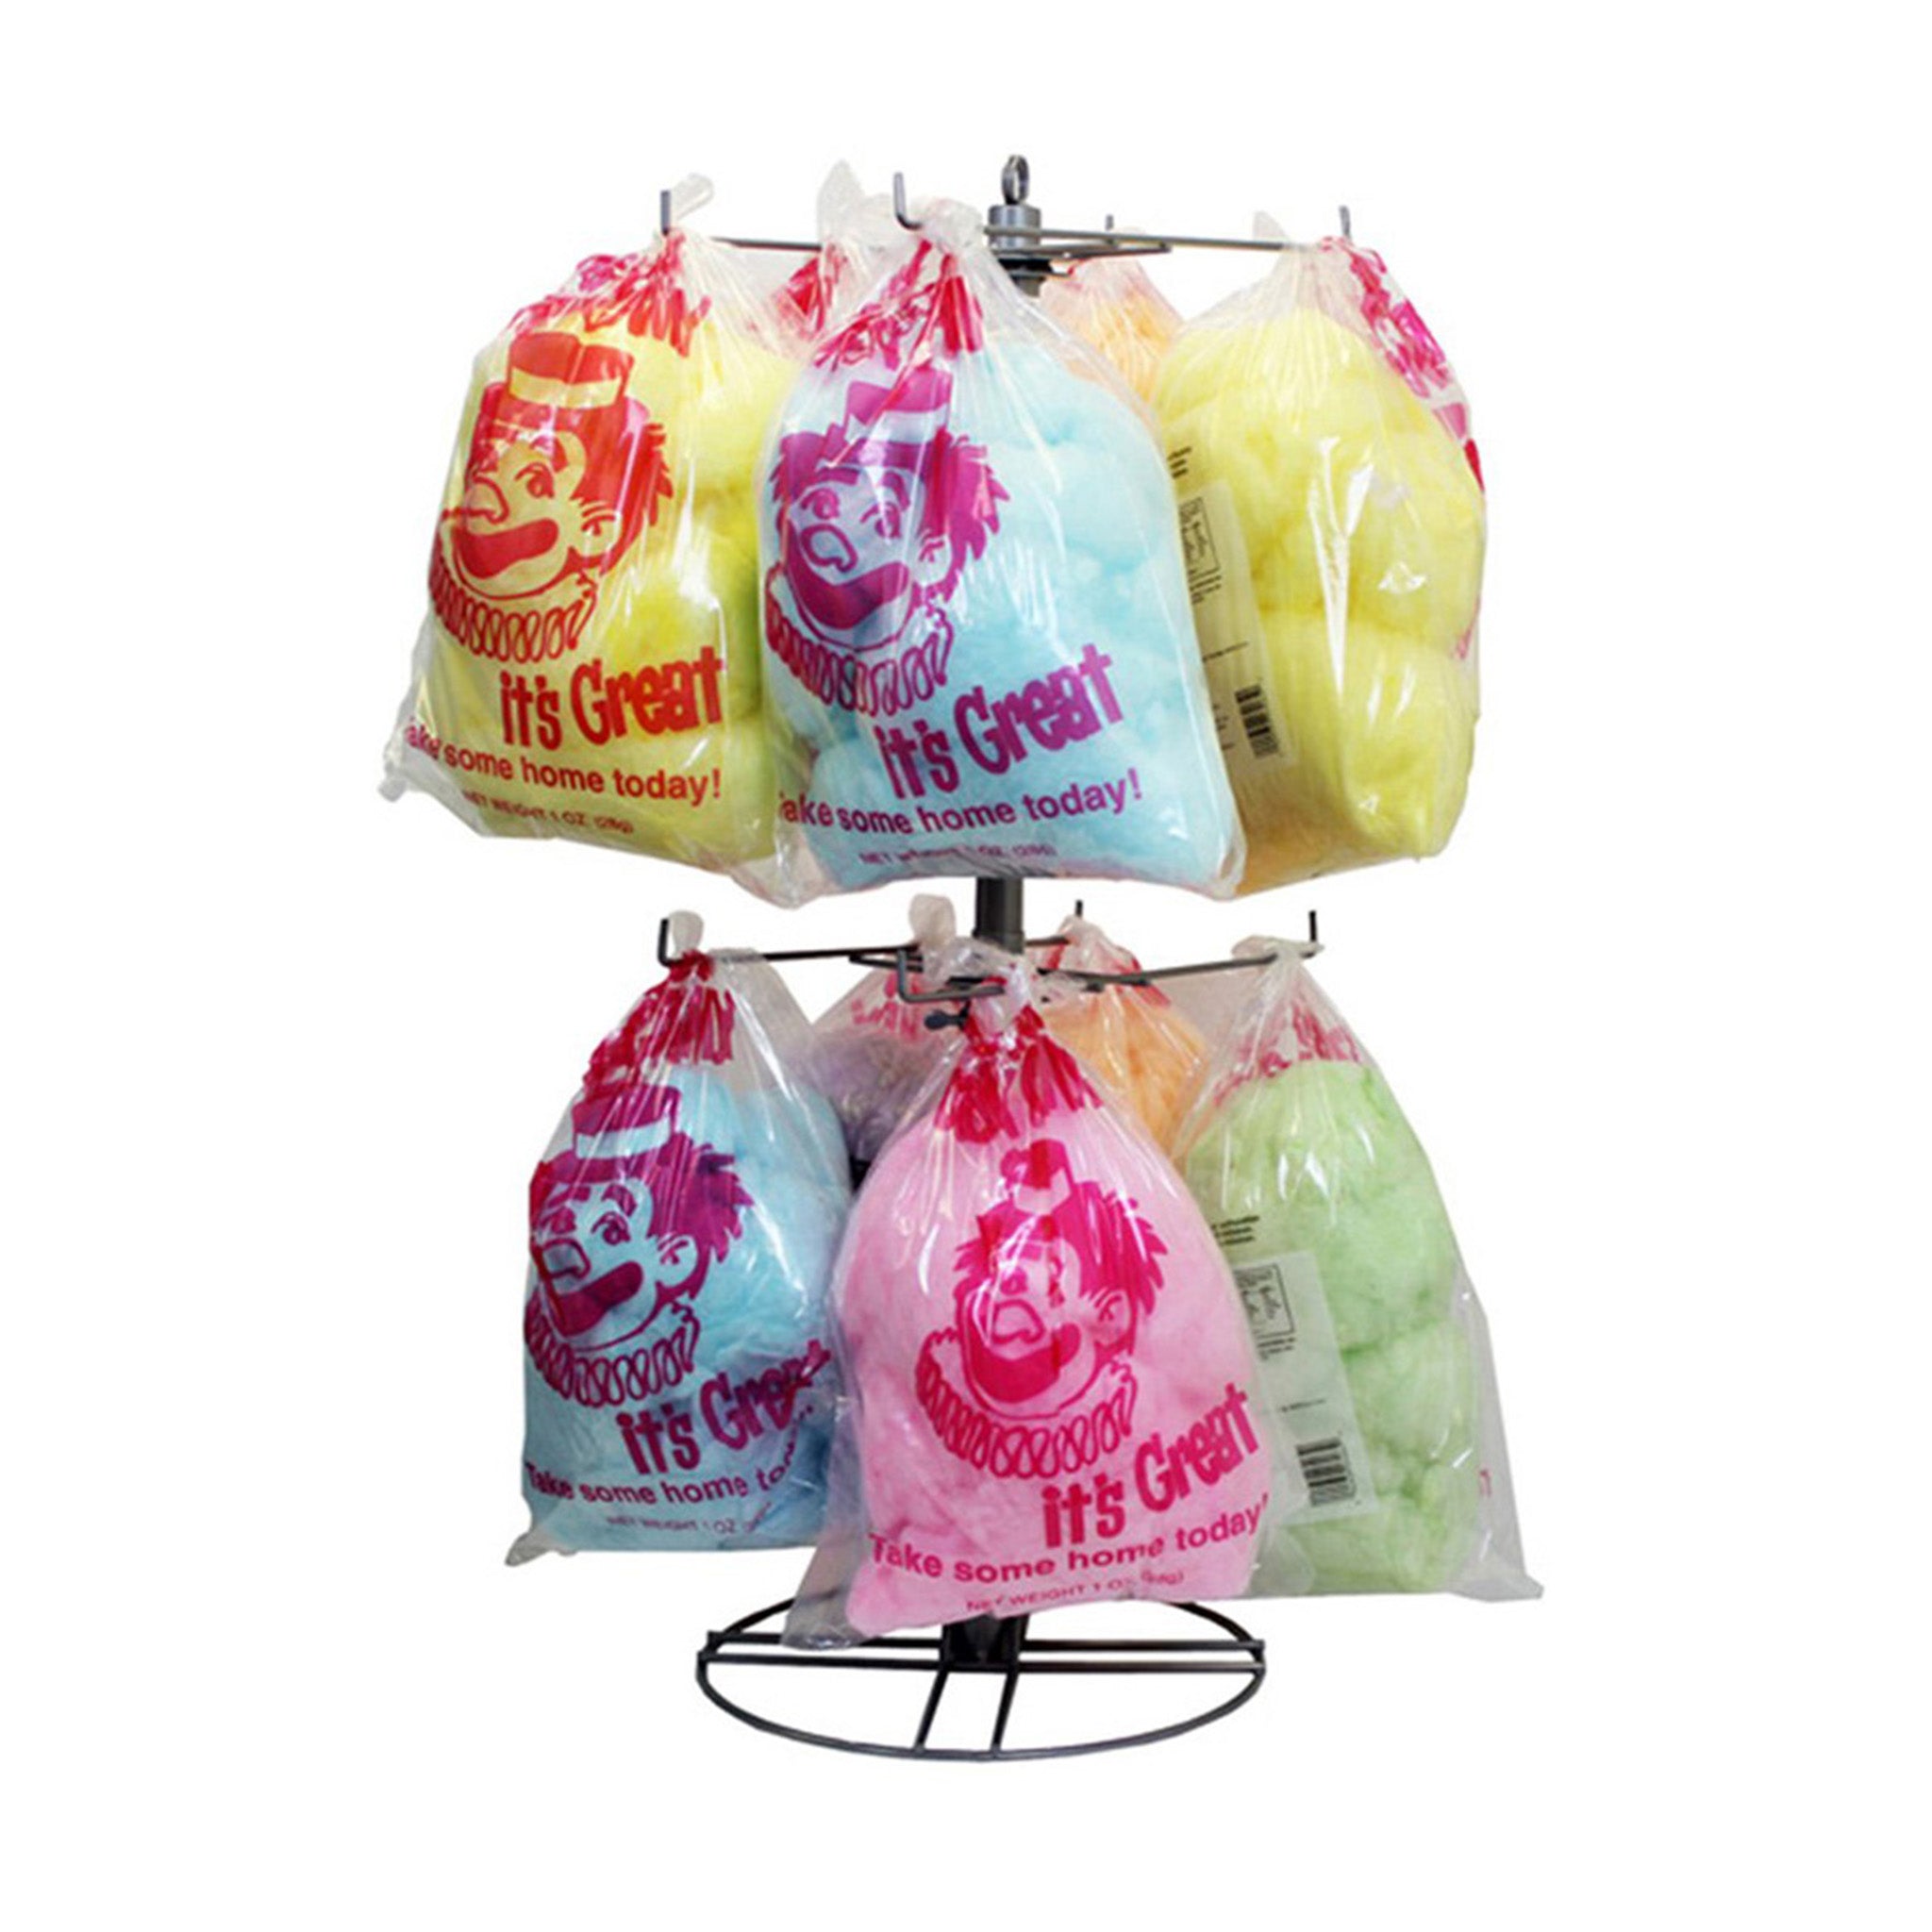 Red Clown Candy Floss Bags